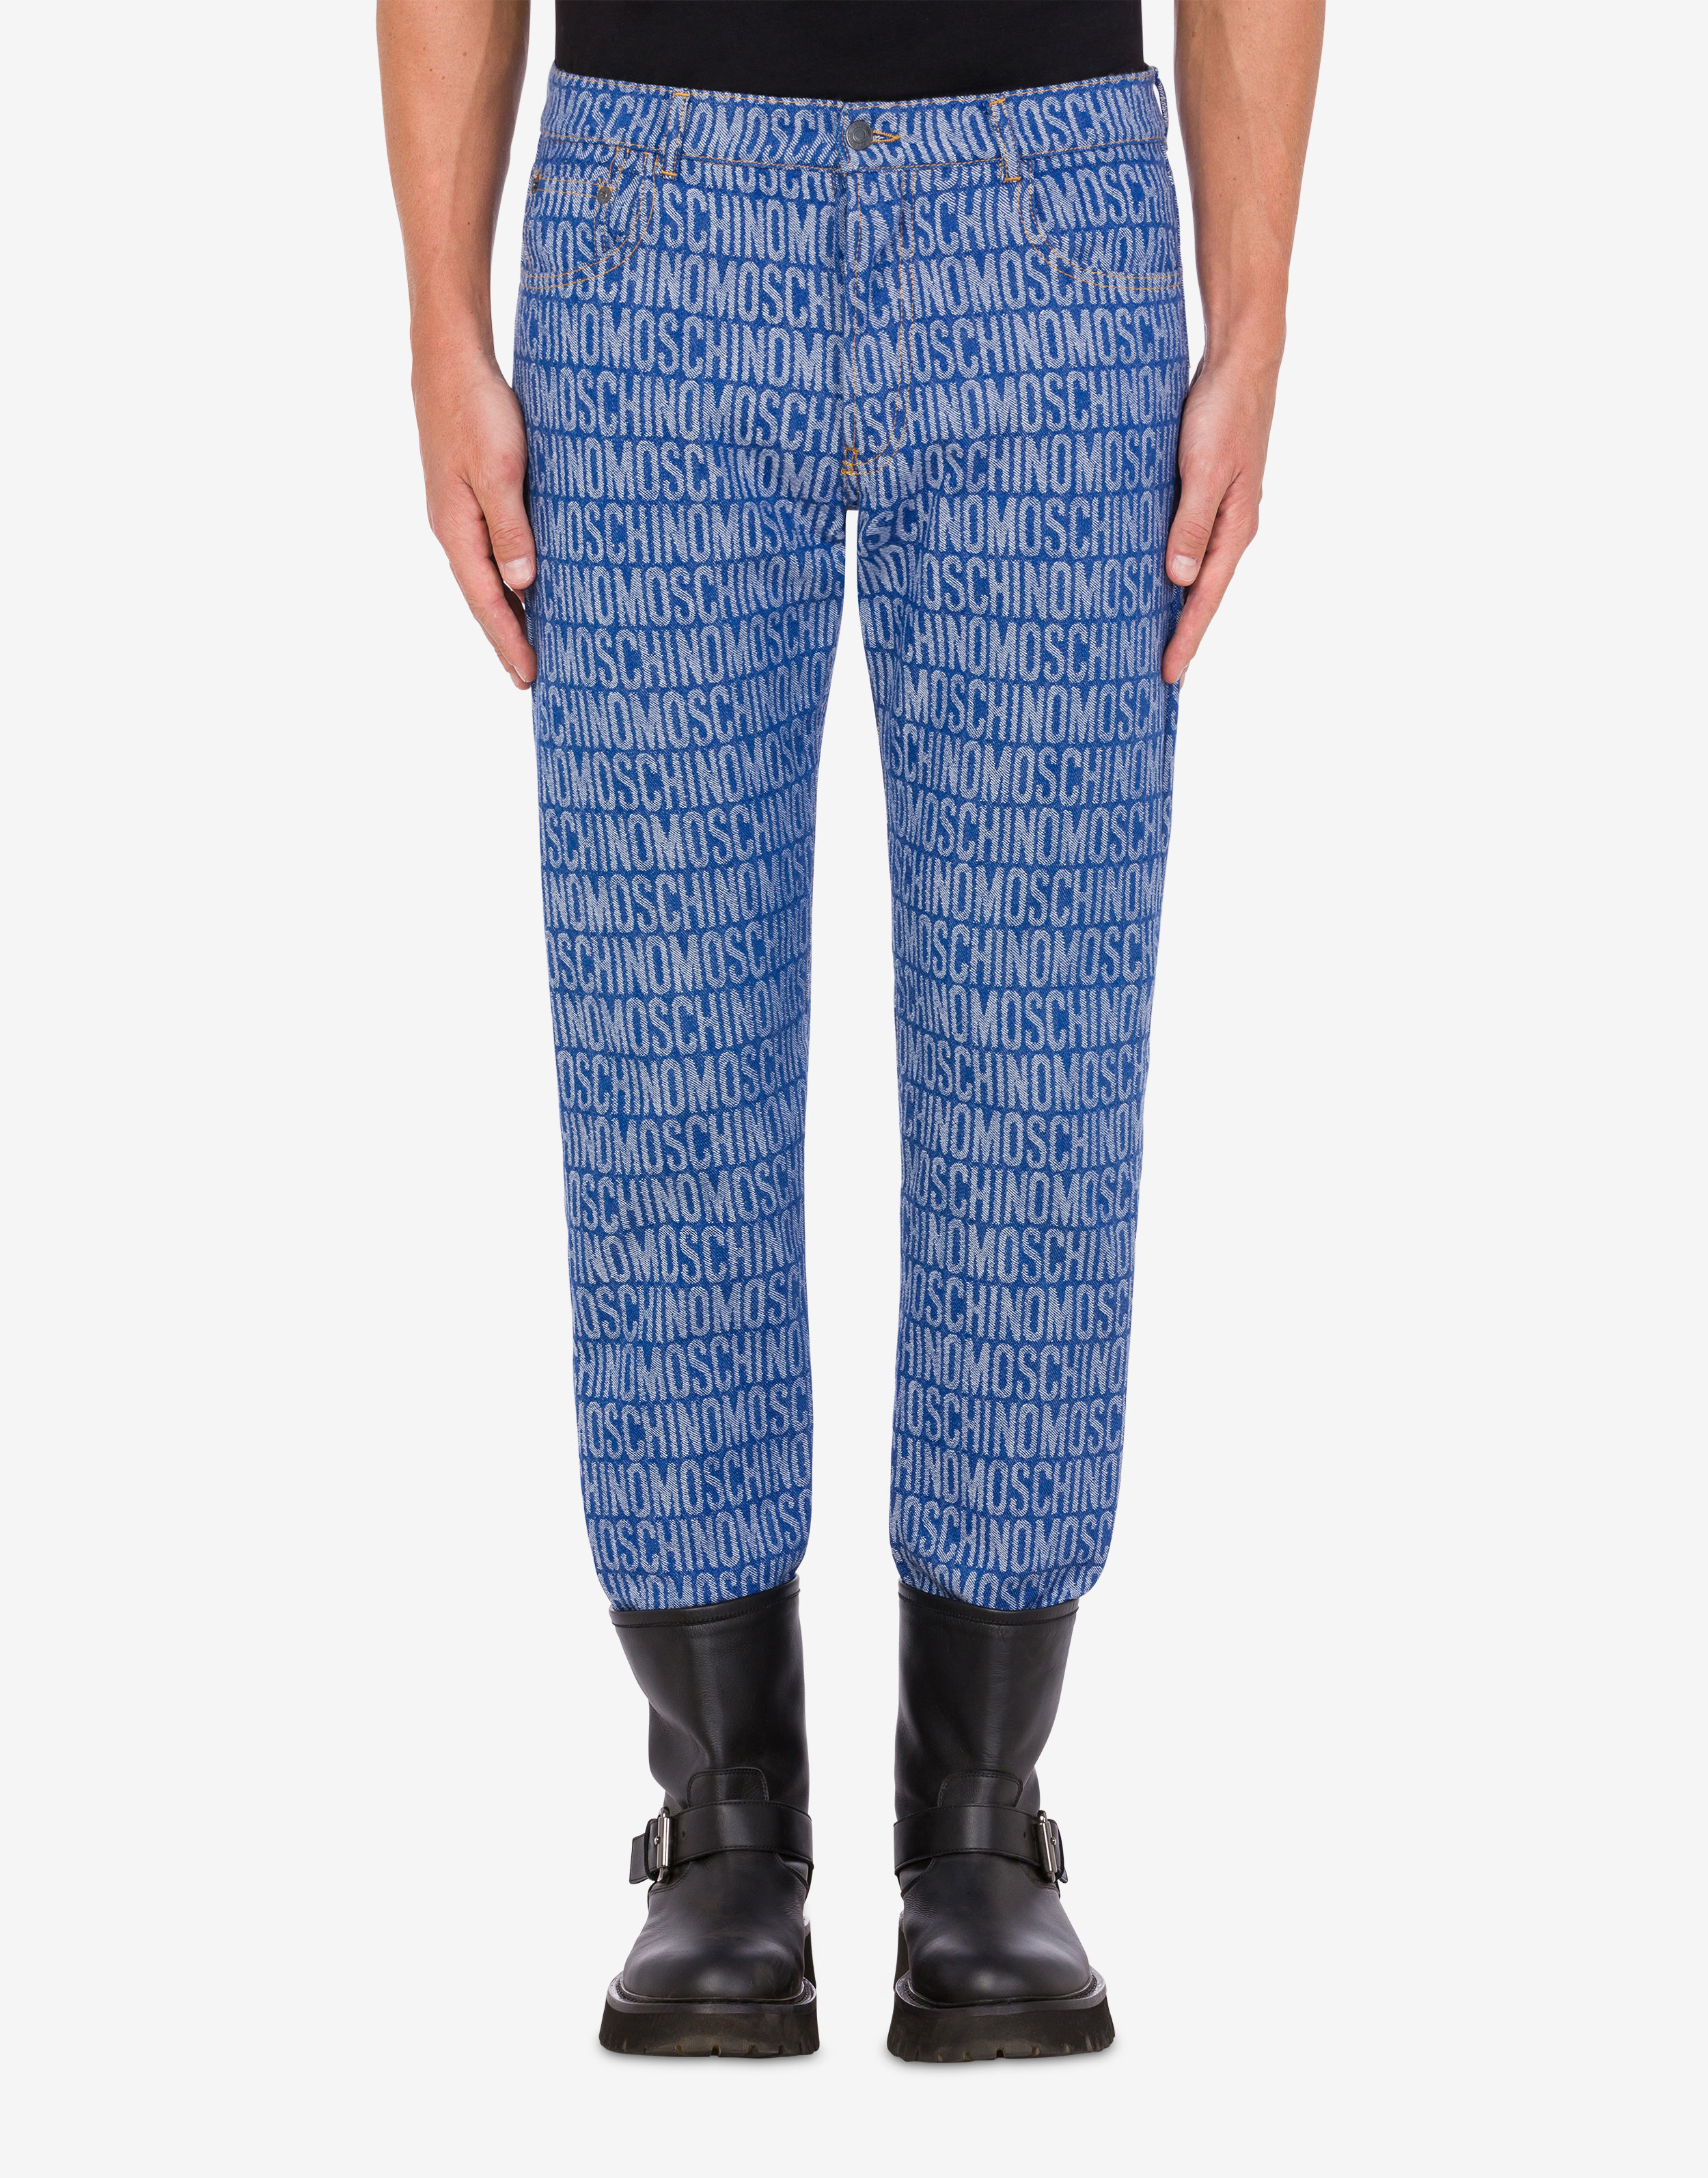 1990s-2000s MOSCHINO JEANS Star Print Low Waist Pants